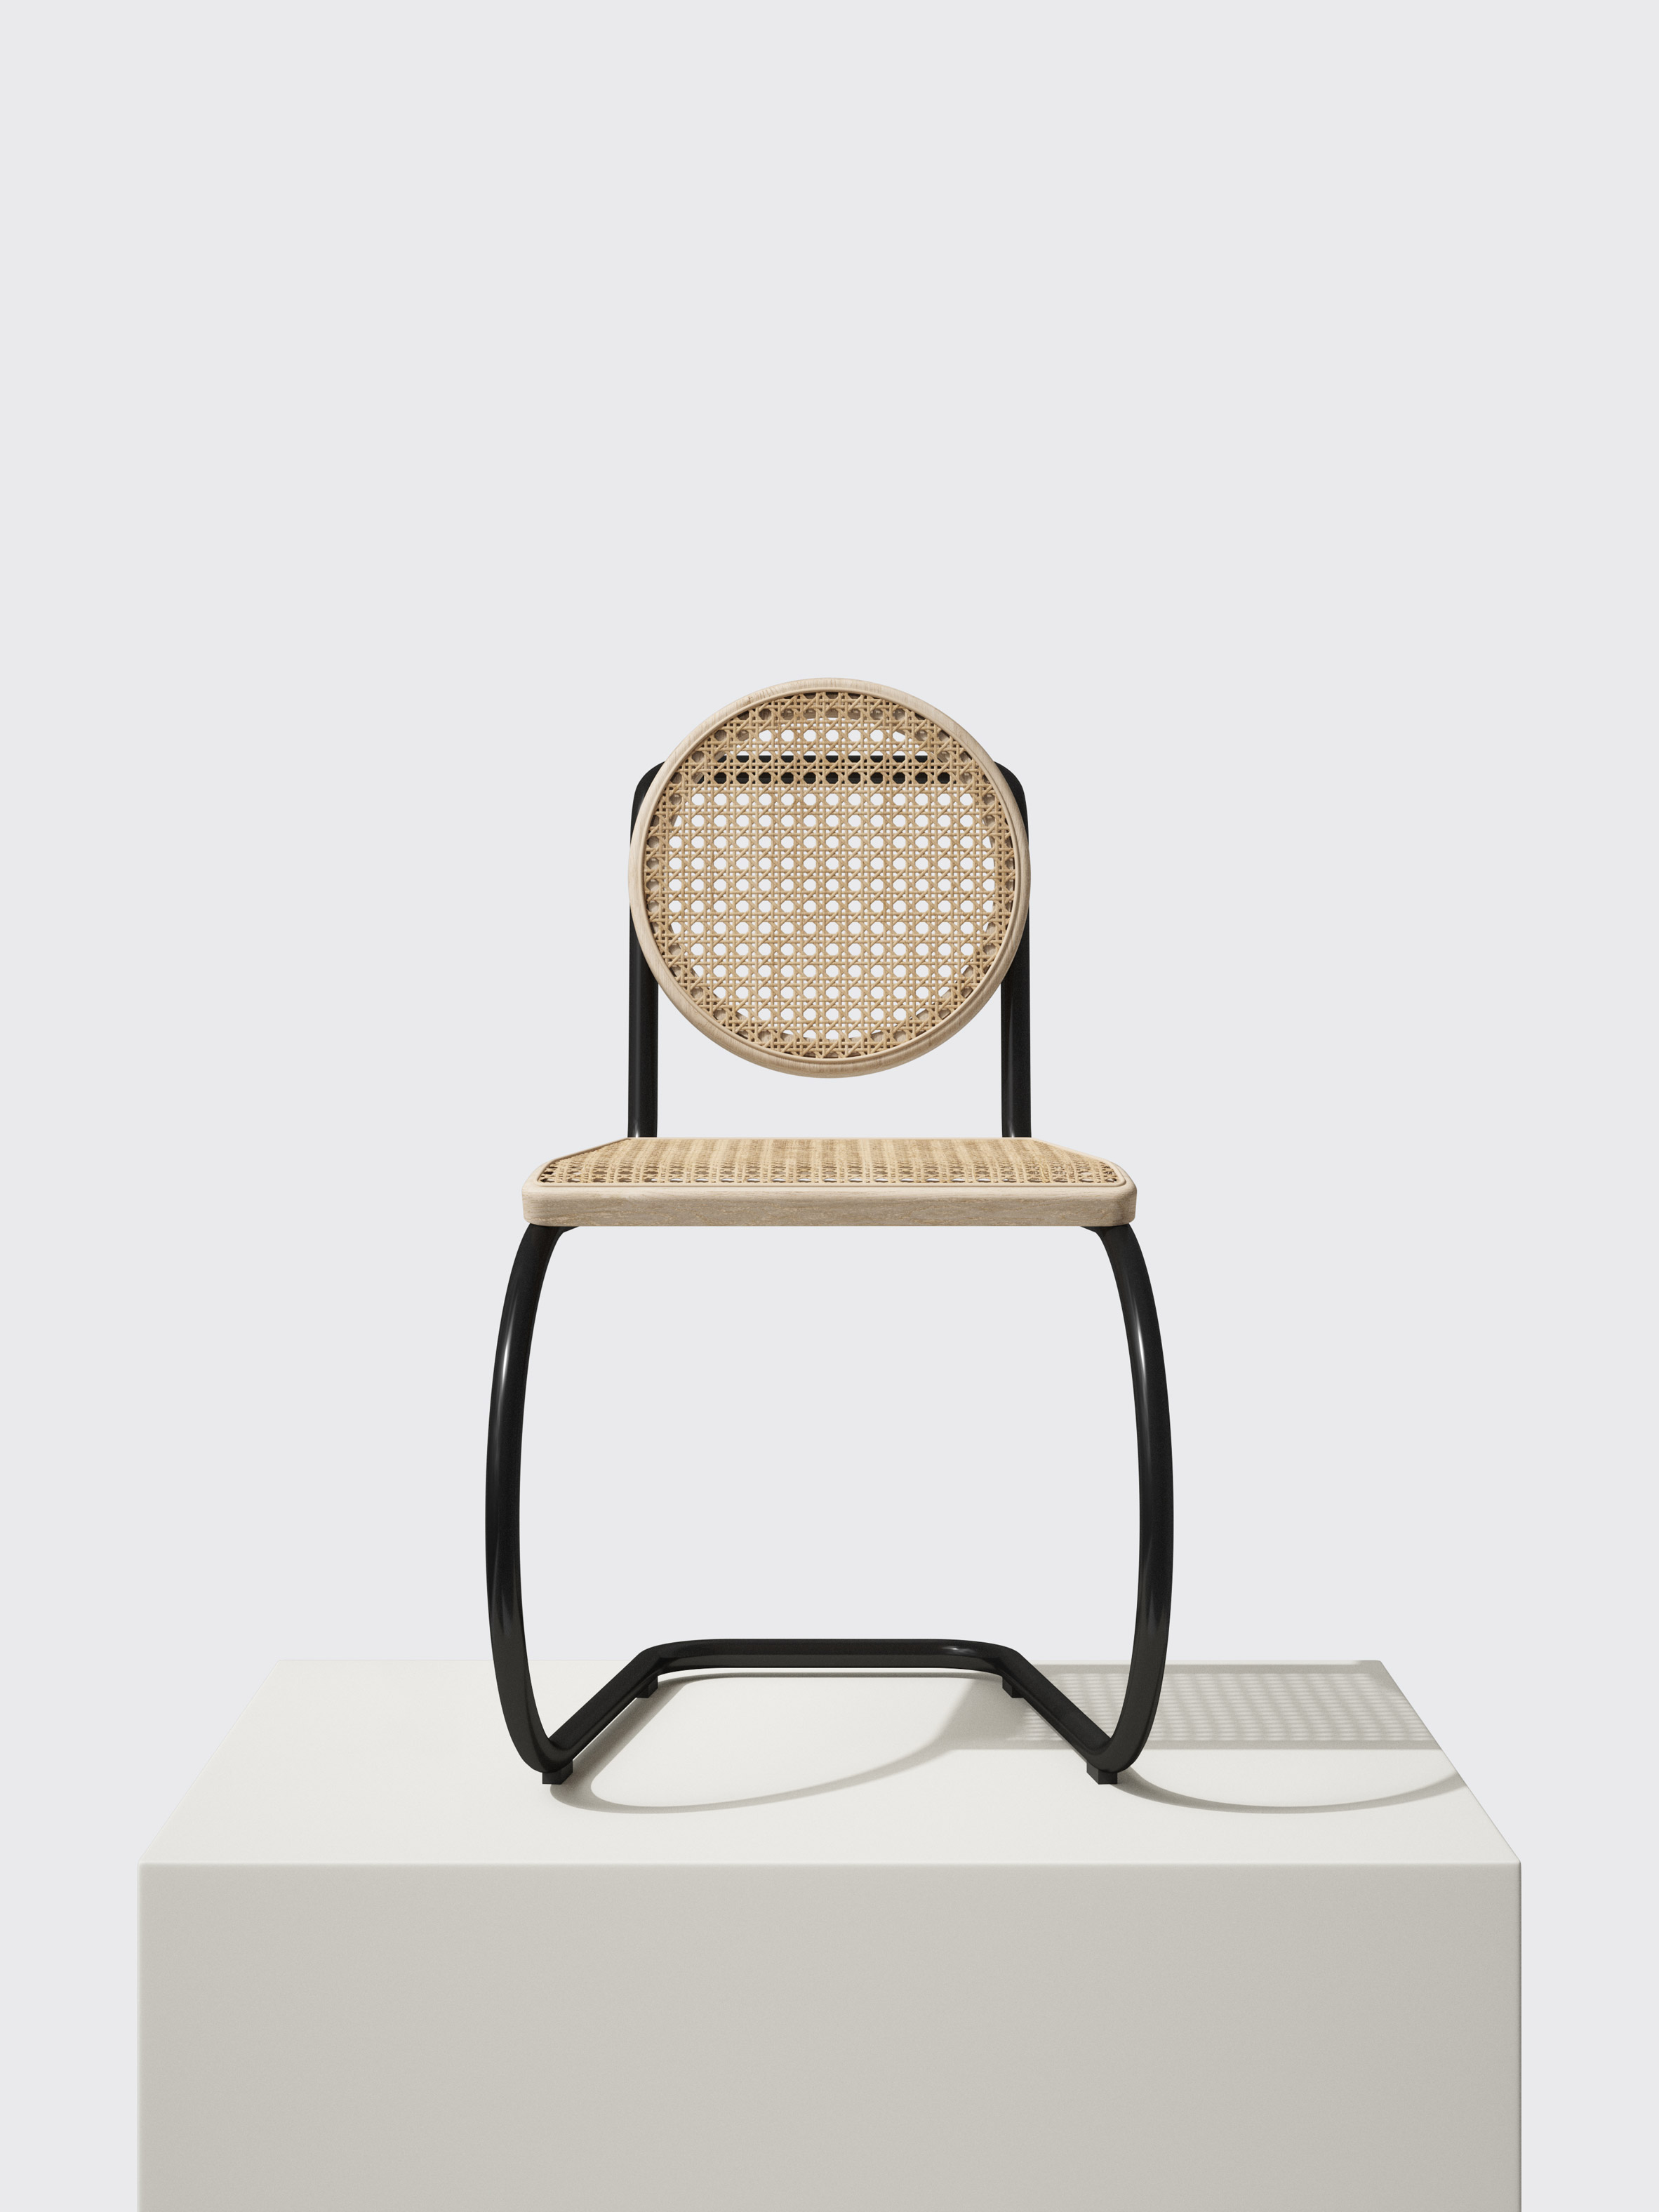 Mater uses recycled plastic and rattan for latest sustainable furniture designs